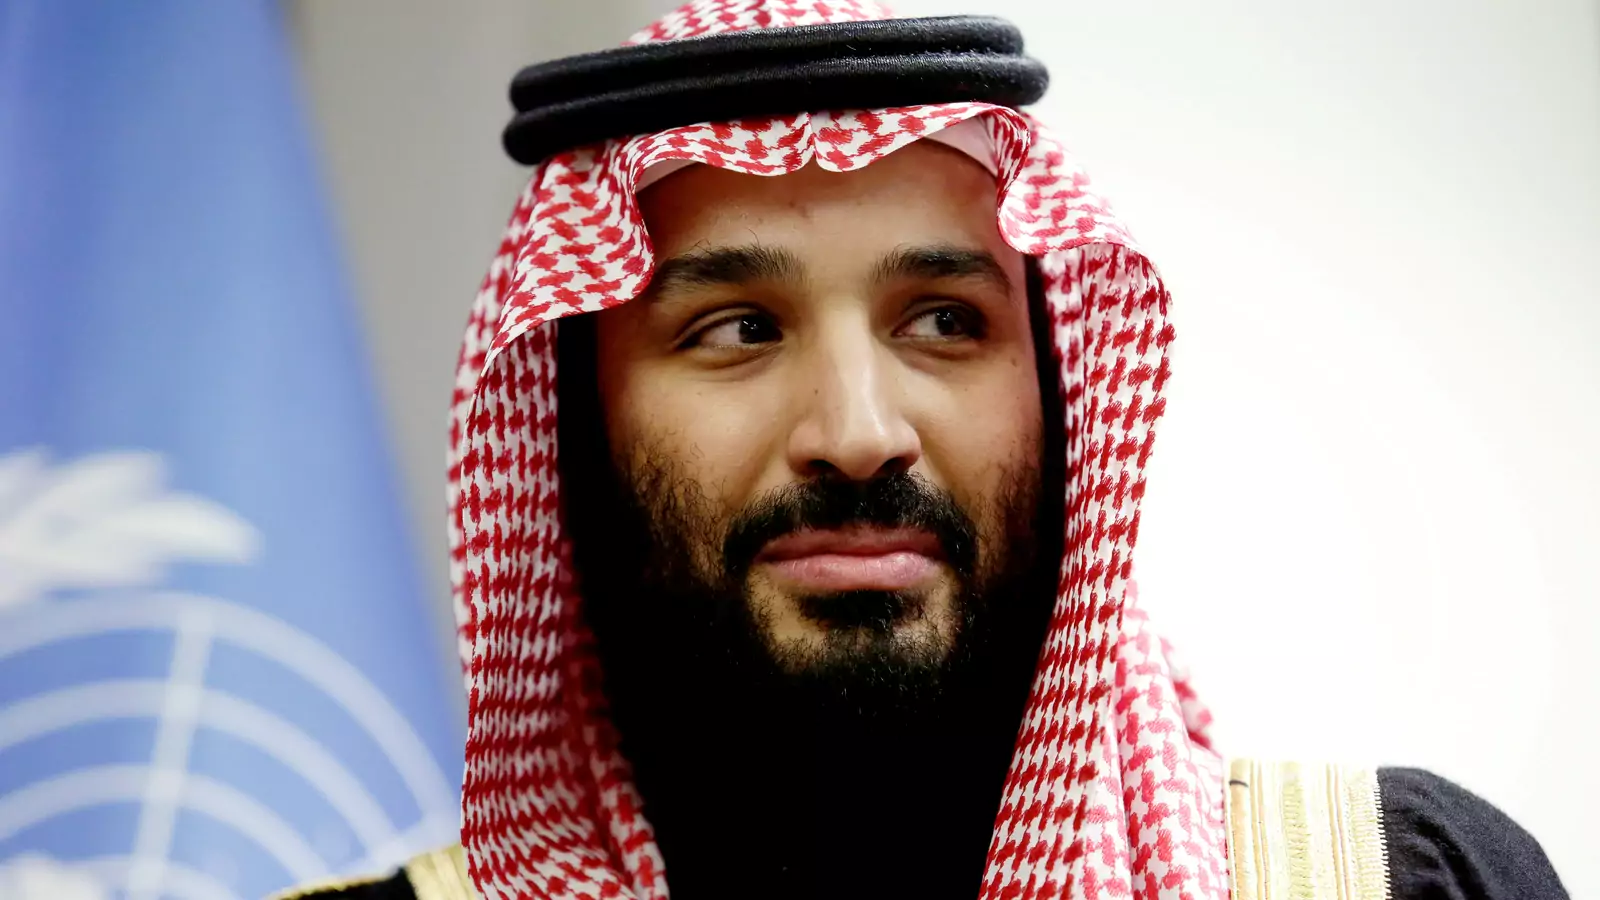 Saudi Arabia's Crown Prince Mohammed bin Salman Al Saud is seen during a meeting with U.N Secretary-General Antonio Guterres at the United Nations headquarters in the Manhattan borough of New York City, New York, U.S. March 27, 2018